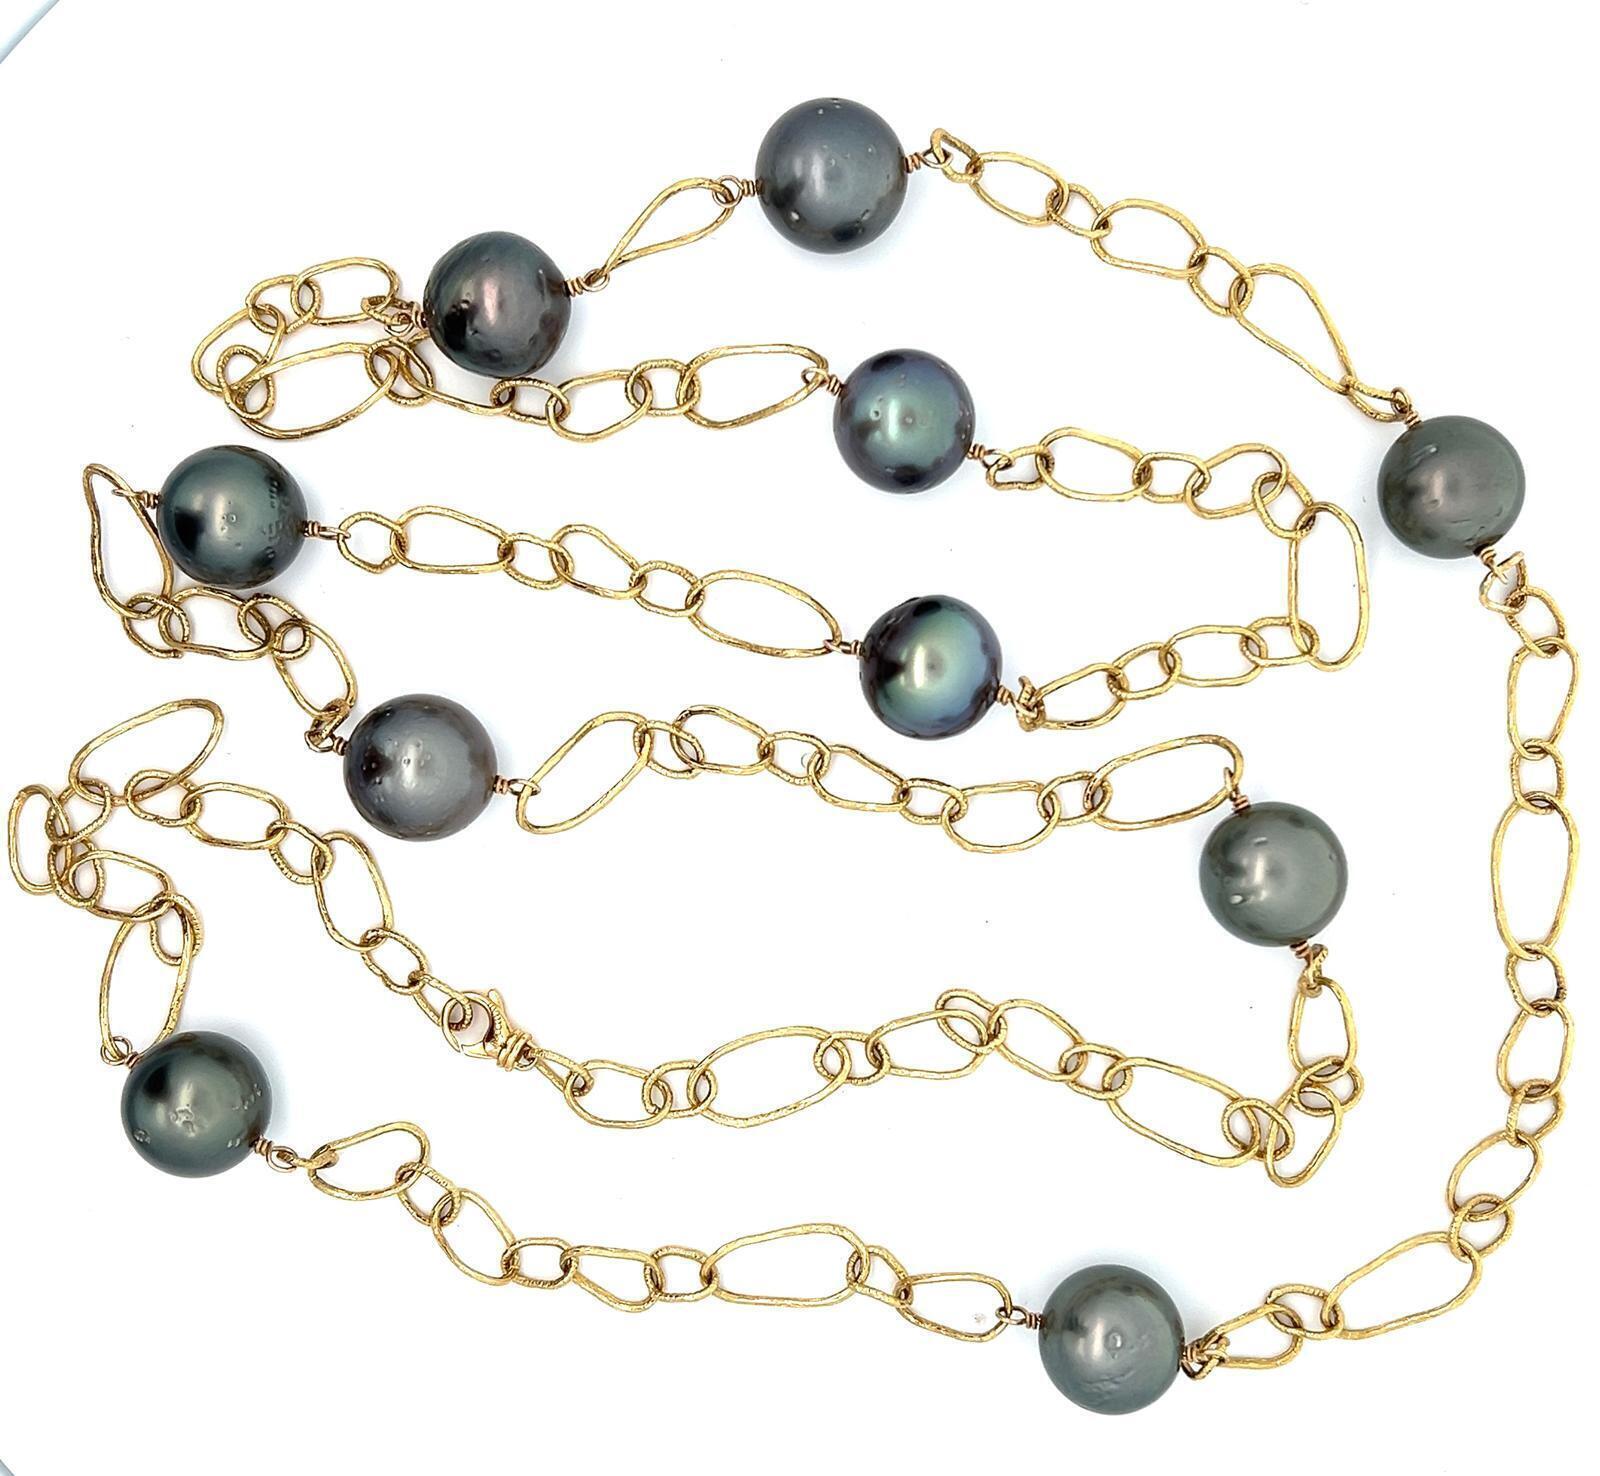 BUCCELLATI 18K GOLD AND TAHITIAN 13 - 13.5MM BLACK PEARL NECKLACE